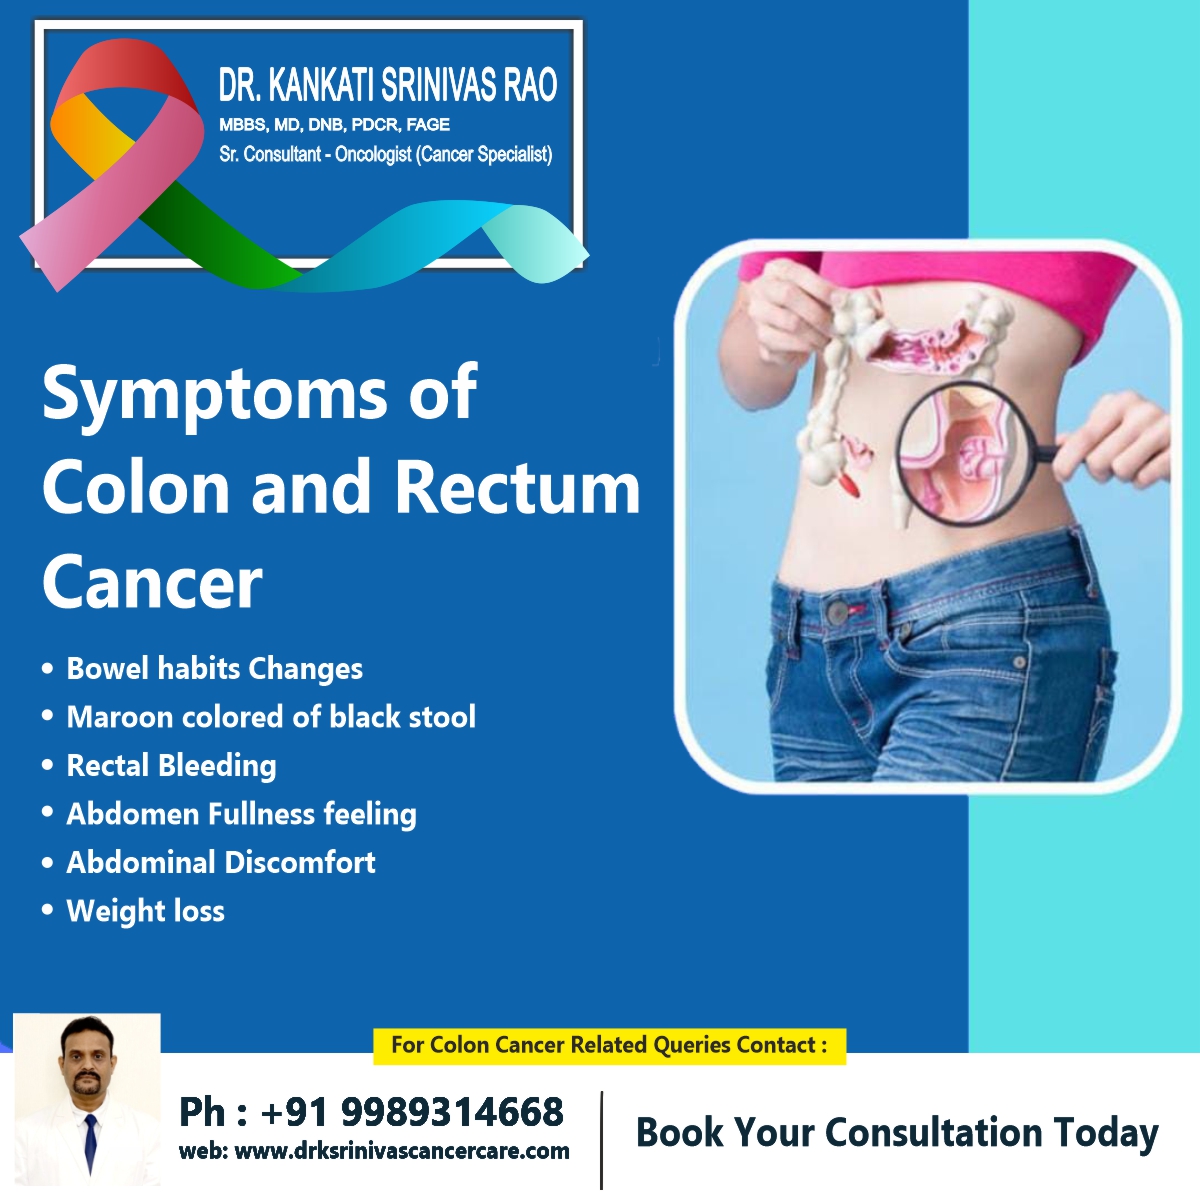 Symptoms of colon and rectum cancer ✔️ Bowel habits changes ✔️ Maroon colored or black stool ✔️ Rectal bleeding ✔️ Abdomen fullness feeling ✔️ Abdominal discomfort ✔️ Weight loss #drsrinivasrao #colorectalcancer #symptoms #cancersurvivor #colon #rectum #treatment #cancercare